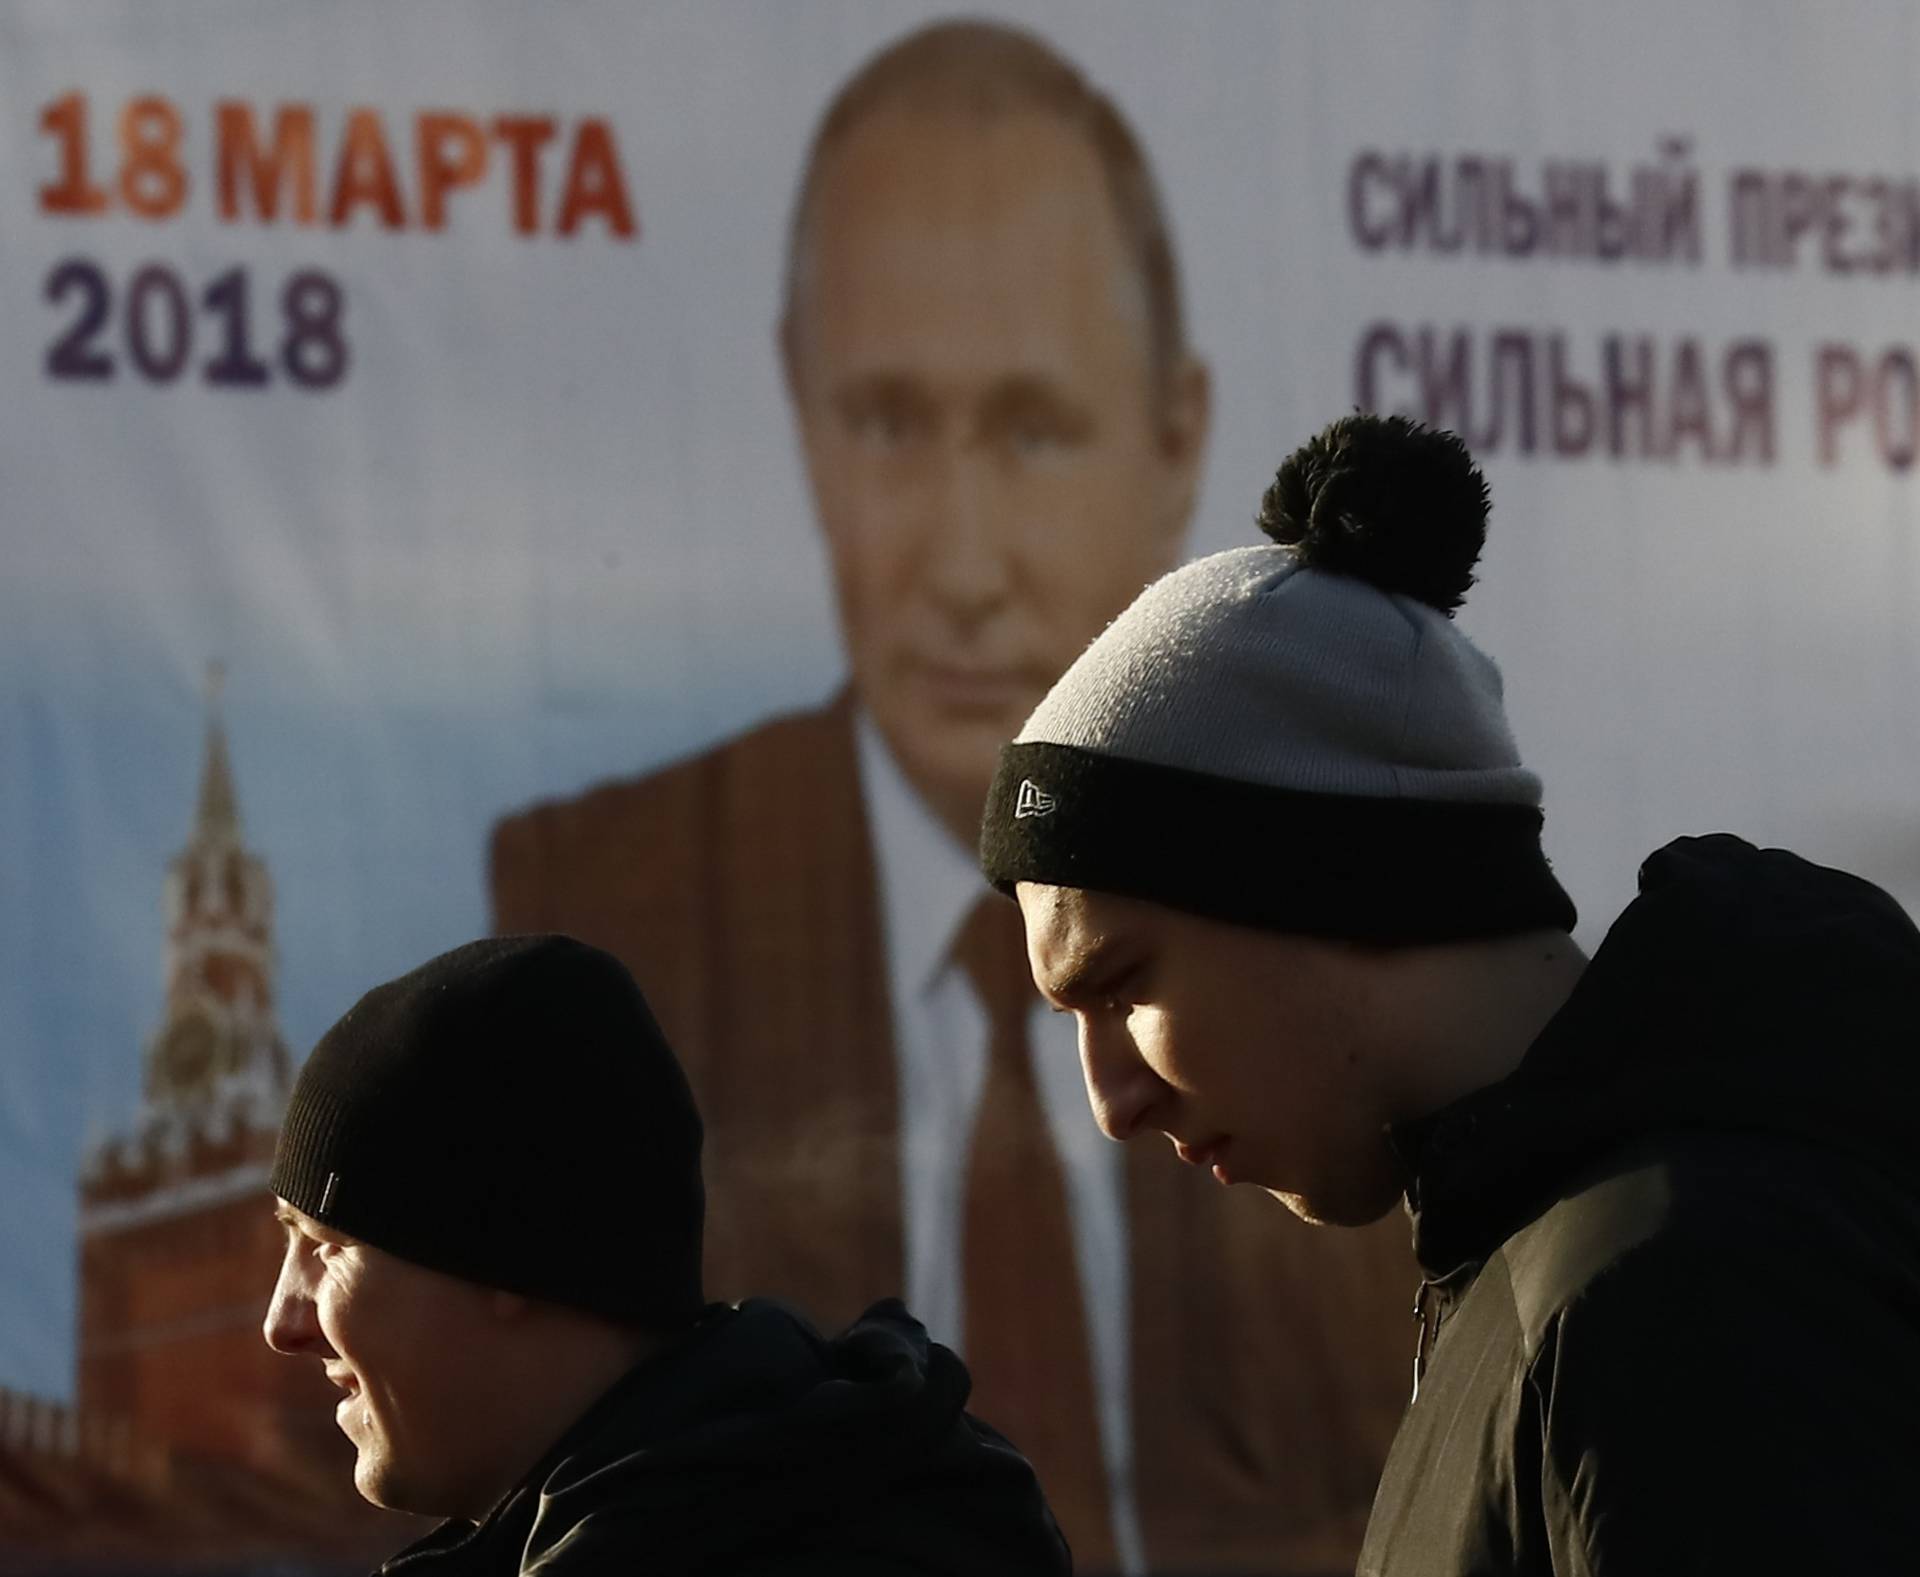 Men walk past a board, which advertises the campaign of Russian President Vladimir Putin ahead of the upcoming presidential election, in a street in Tula